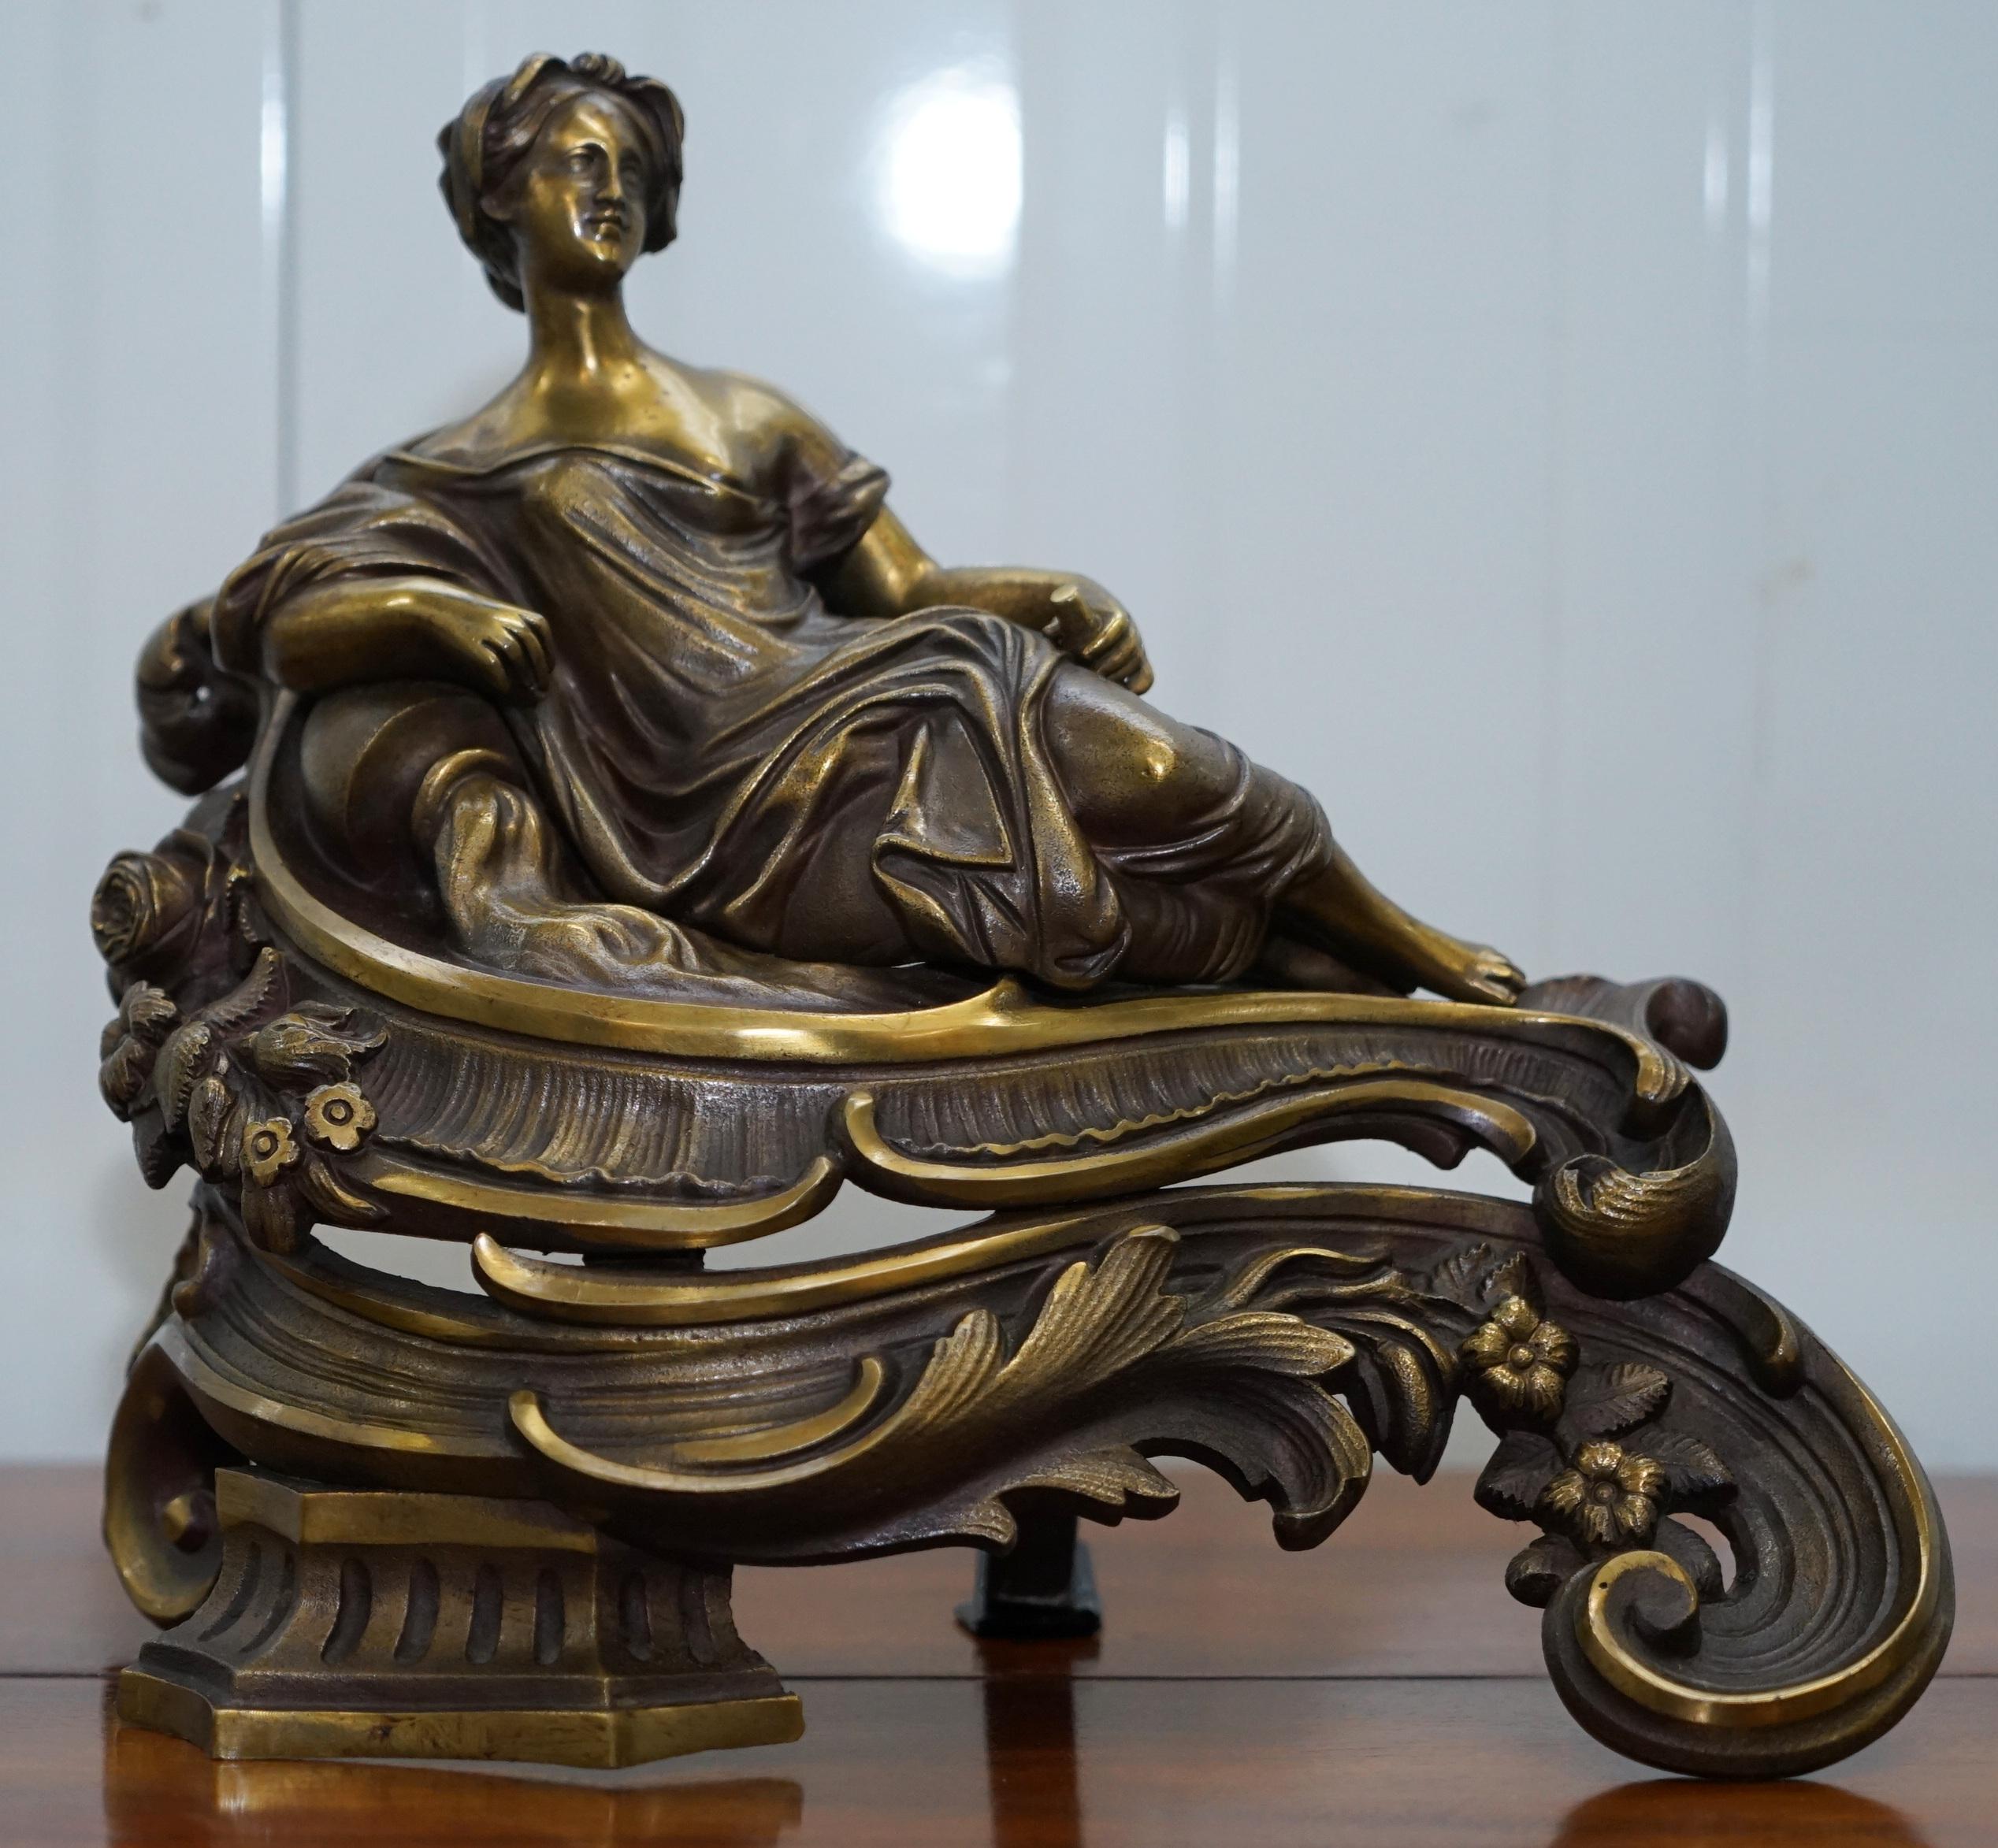 We are delighted to offer for sale this pair of original early Louis XVI handmade solid bronze Chenets after Bouhon Fres Paris

A rare, beautiful and decorative pair, they are nicely gilt and the casting is sublime, the expressions on the faces of